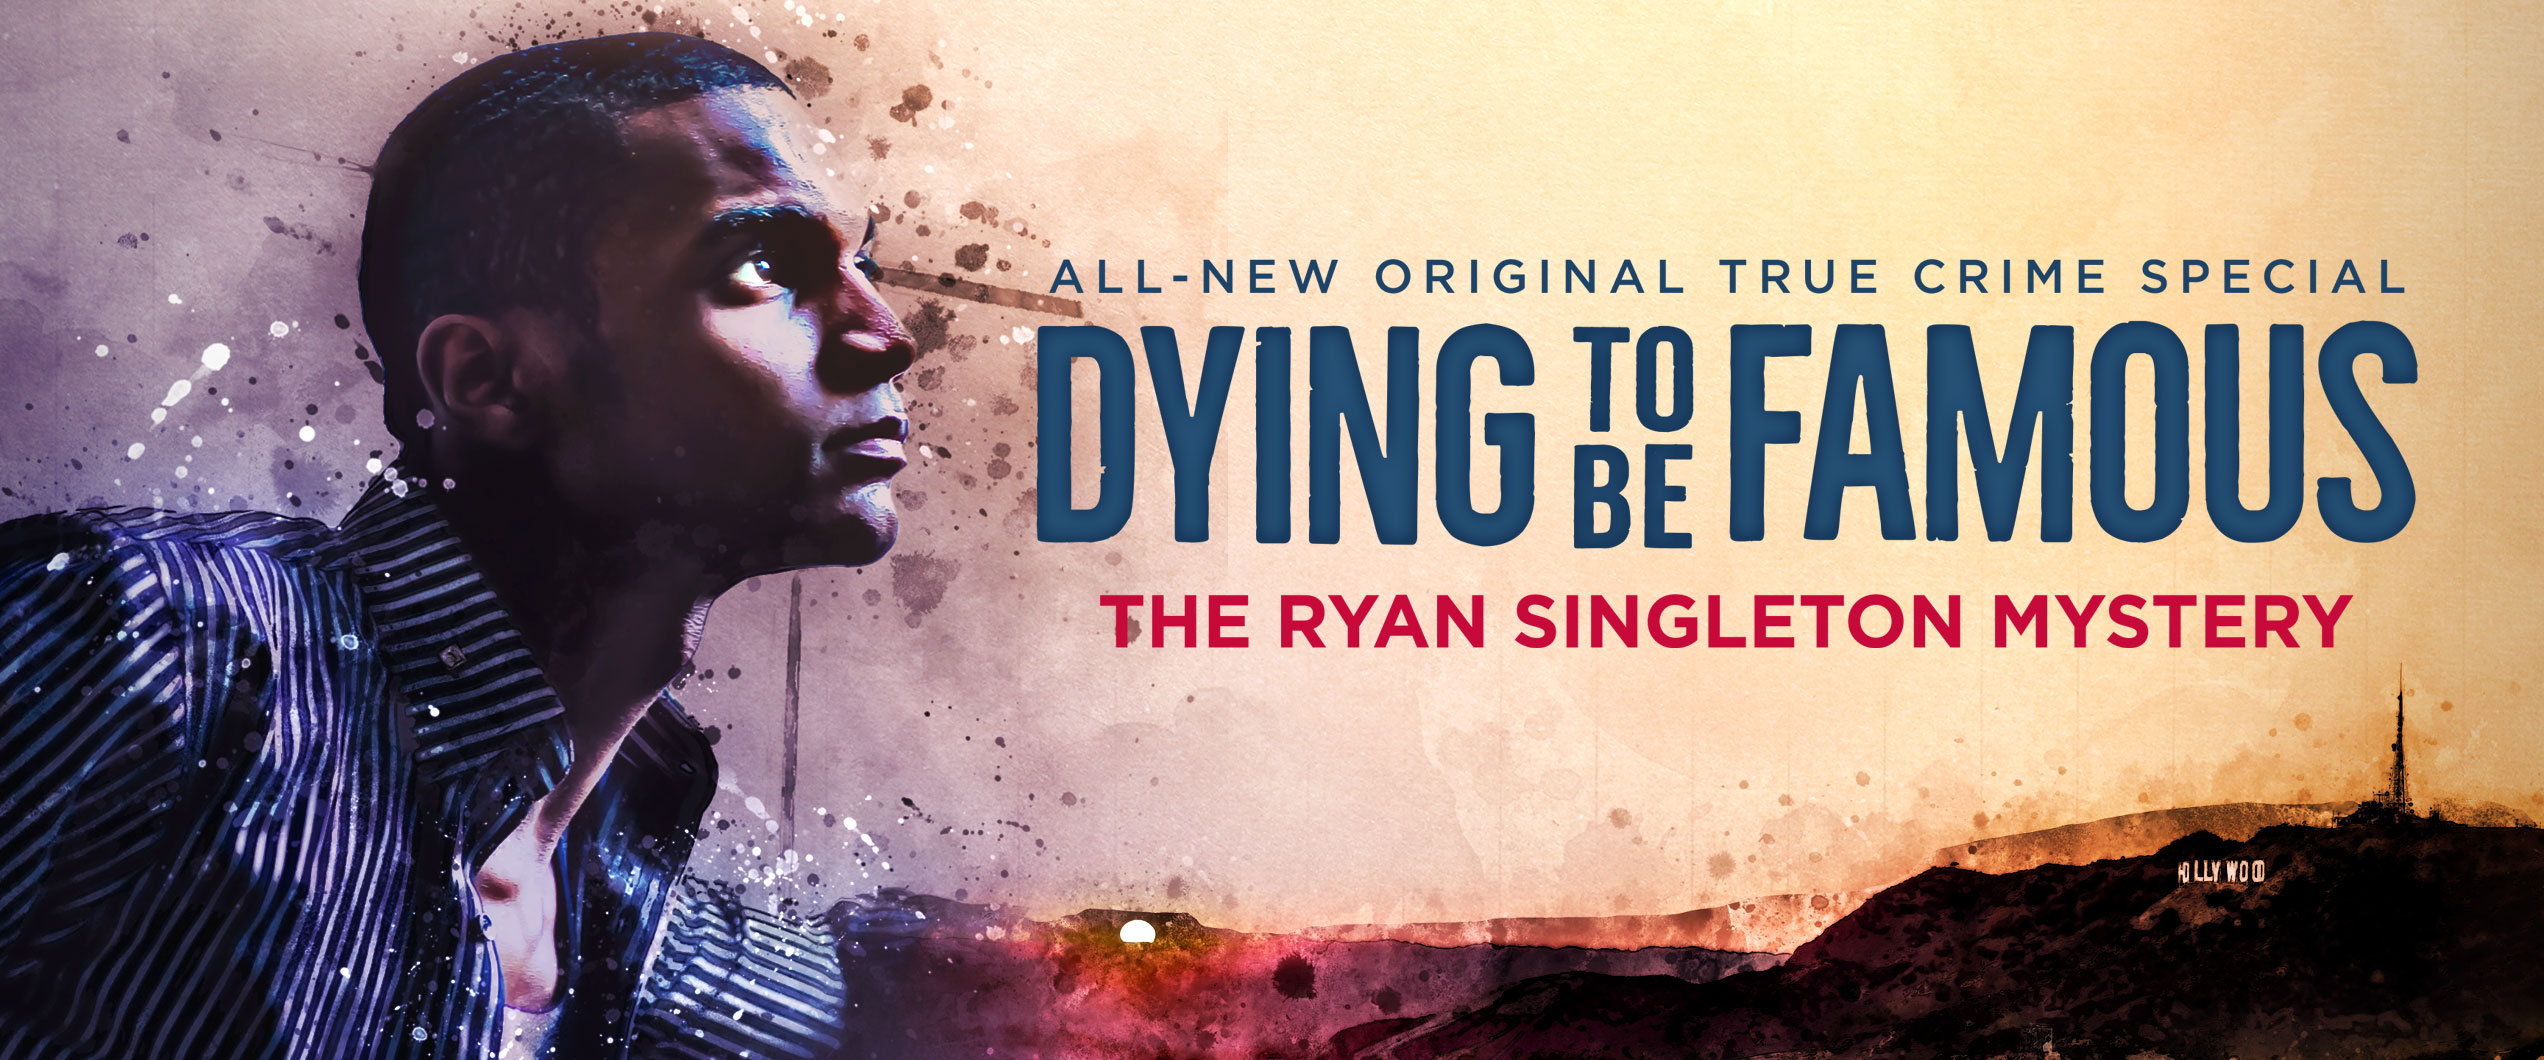 DYING TO BE FAMOUS: THE RYAN SINGLETON MYSTERY